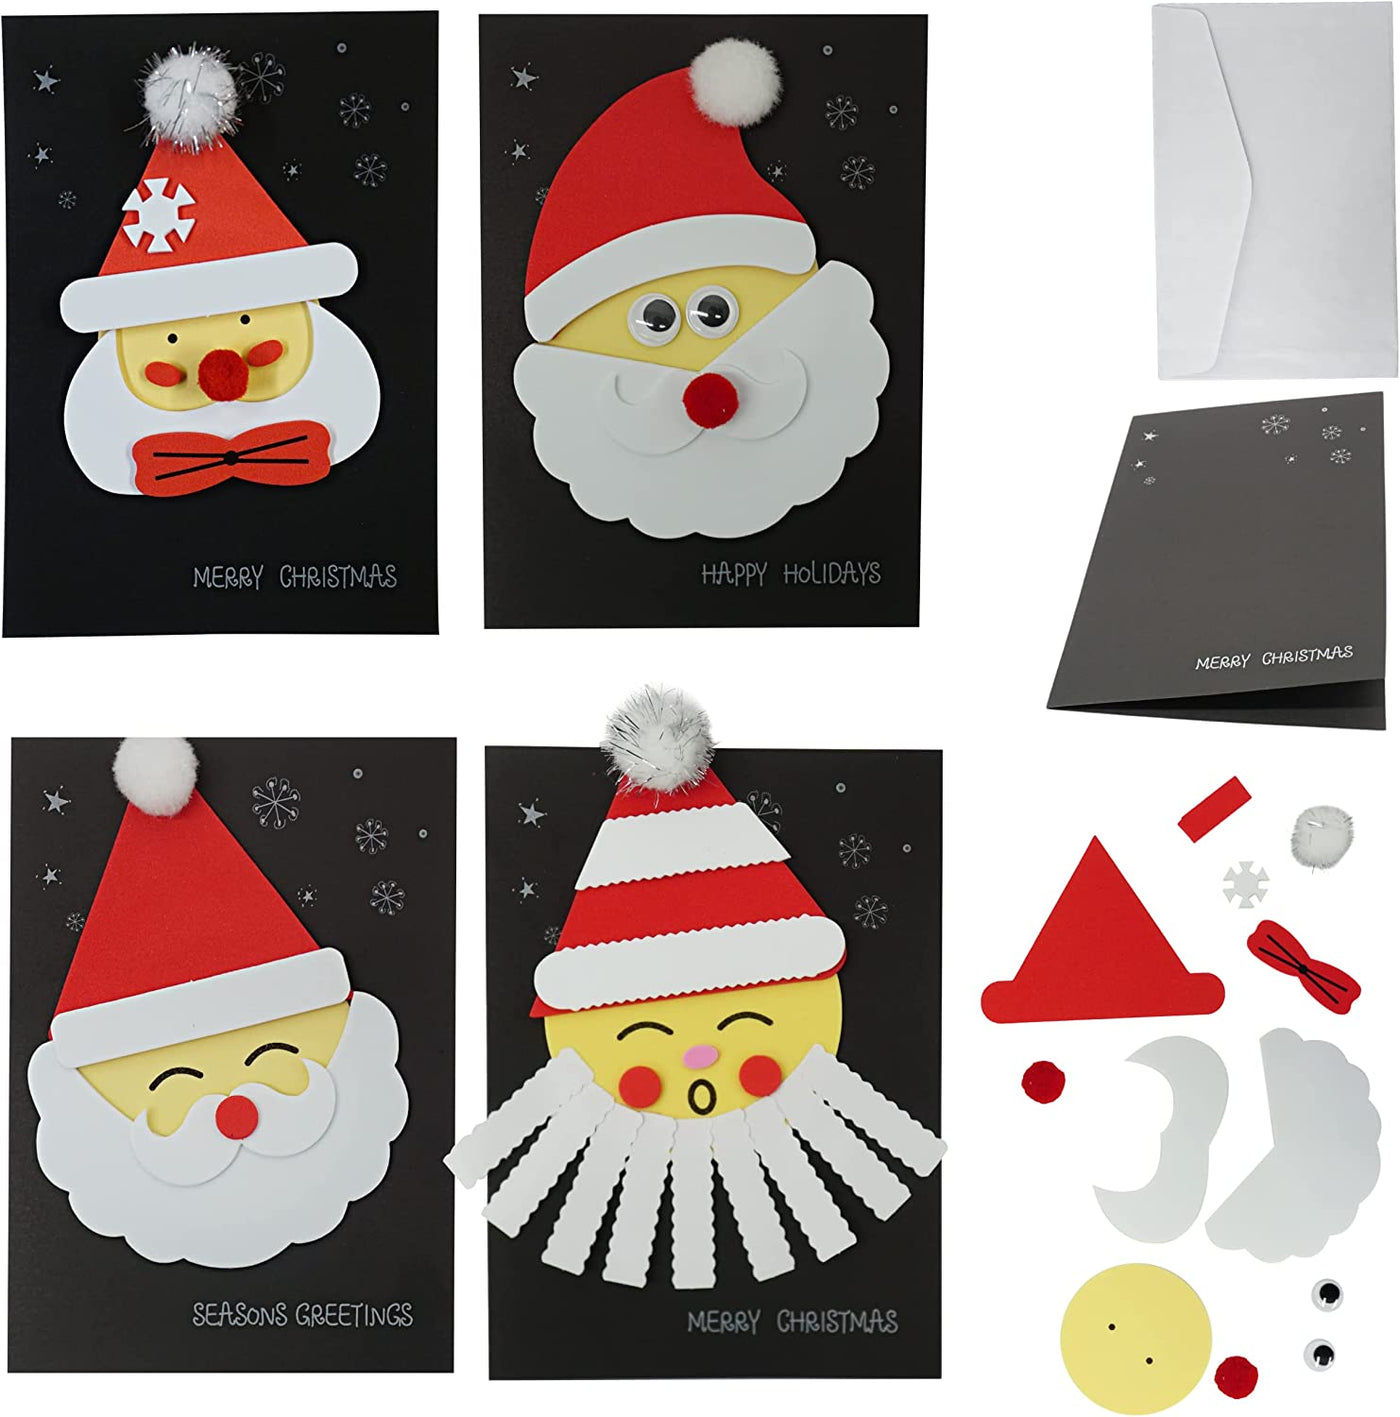 4E's Novelty DIY Christmas Card Making Kits (Makes 12) with Envelopes & All Supplies - for Kids & Adults Handmade Christmas Greeting Cards Craft, Christmas Crafts for Kids Ages 4-8, 8-12